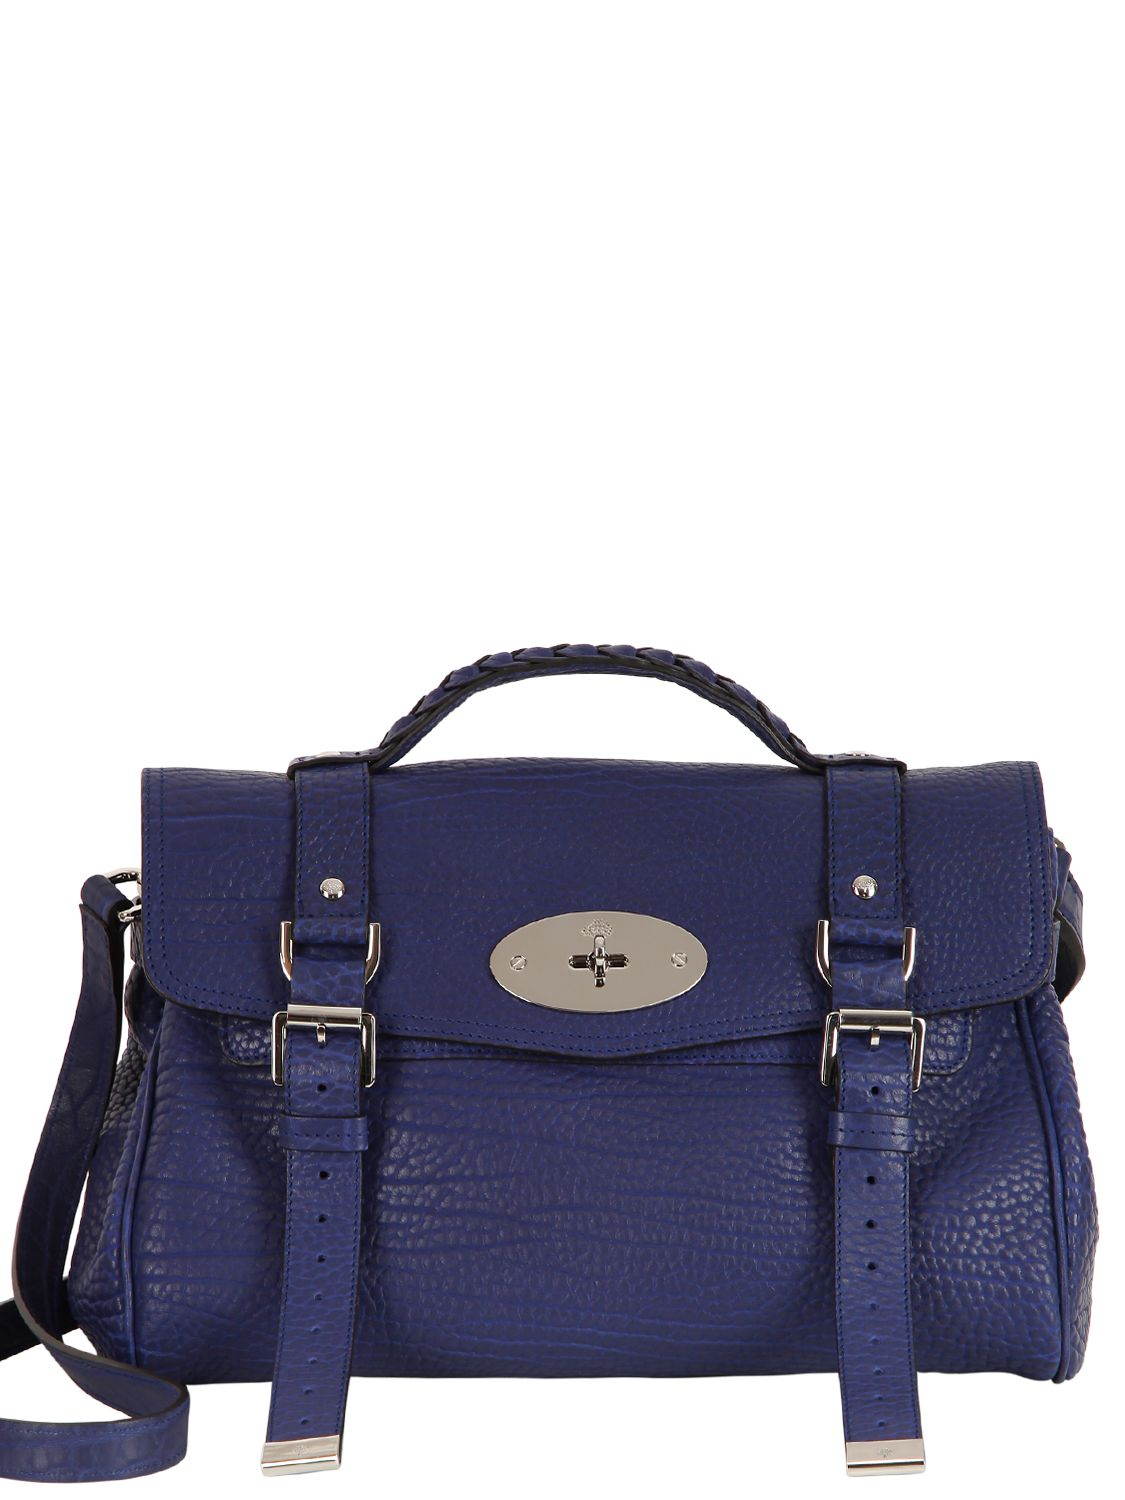 Lyst - Mulberry Alexa Leather Maxi Shoulder Bag in Blue